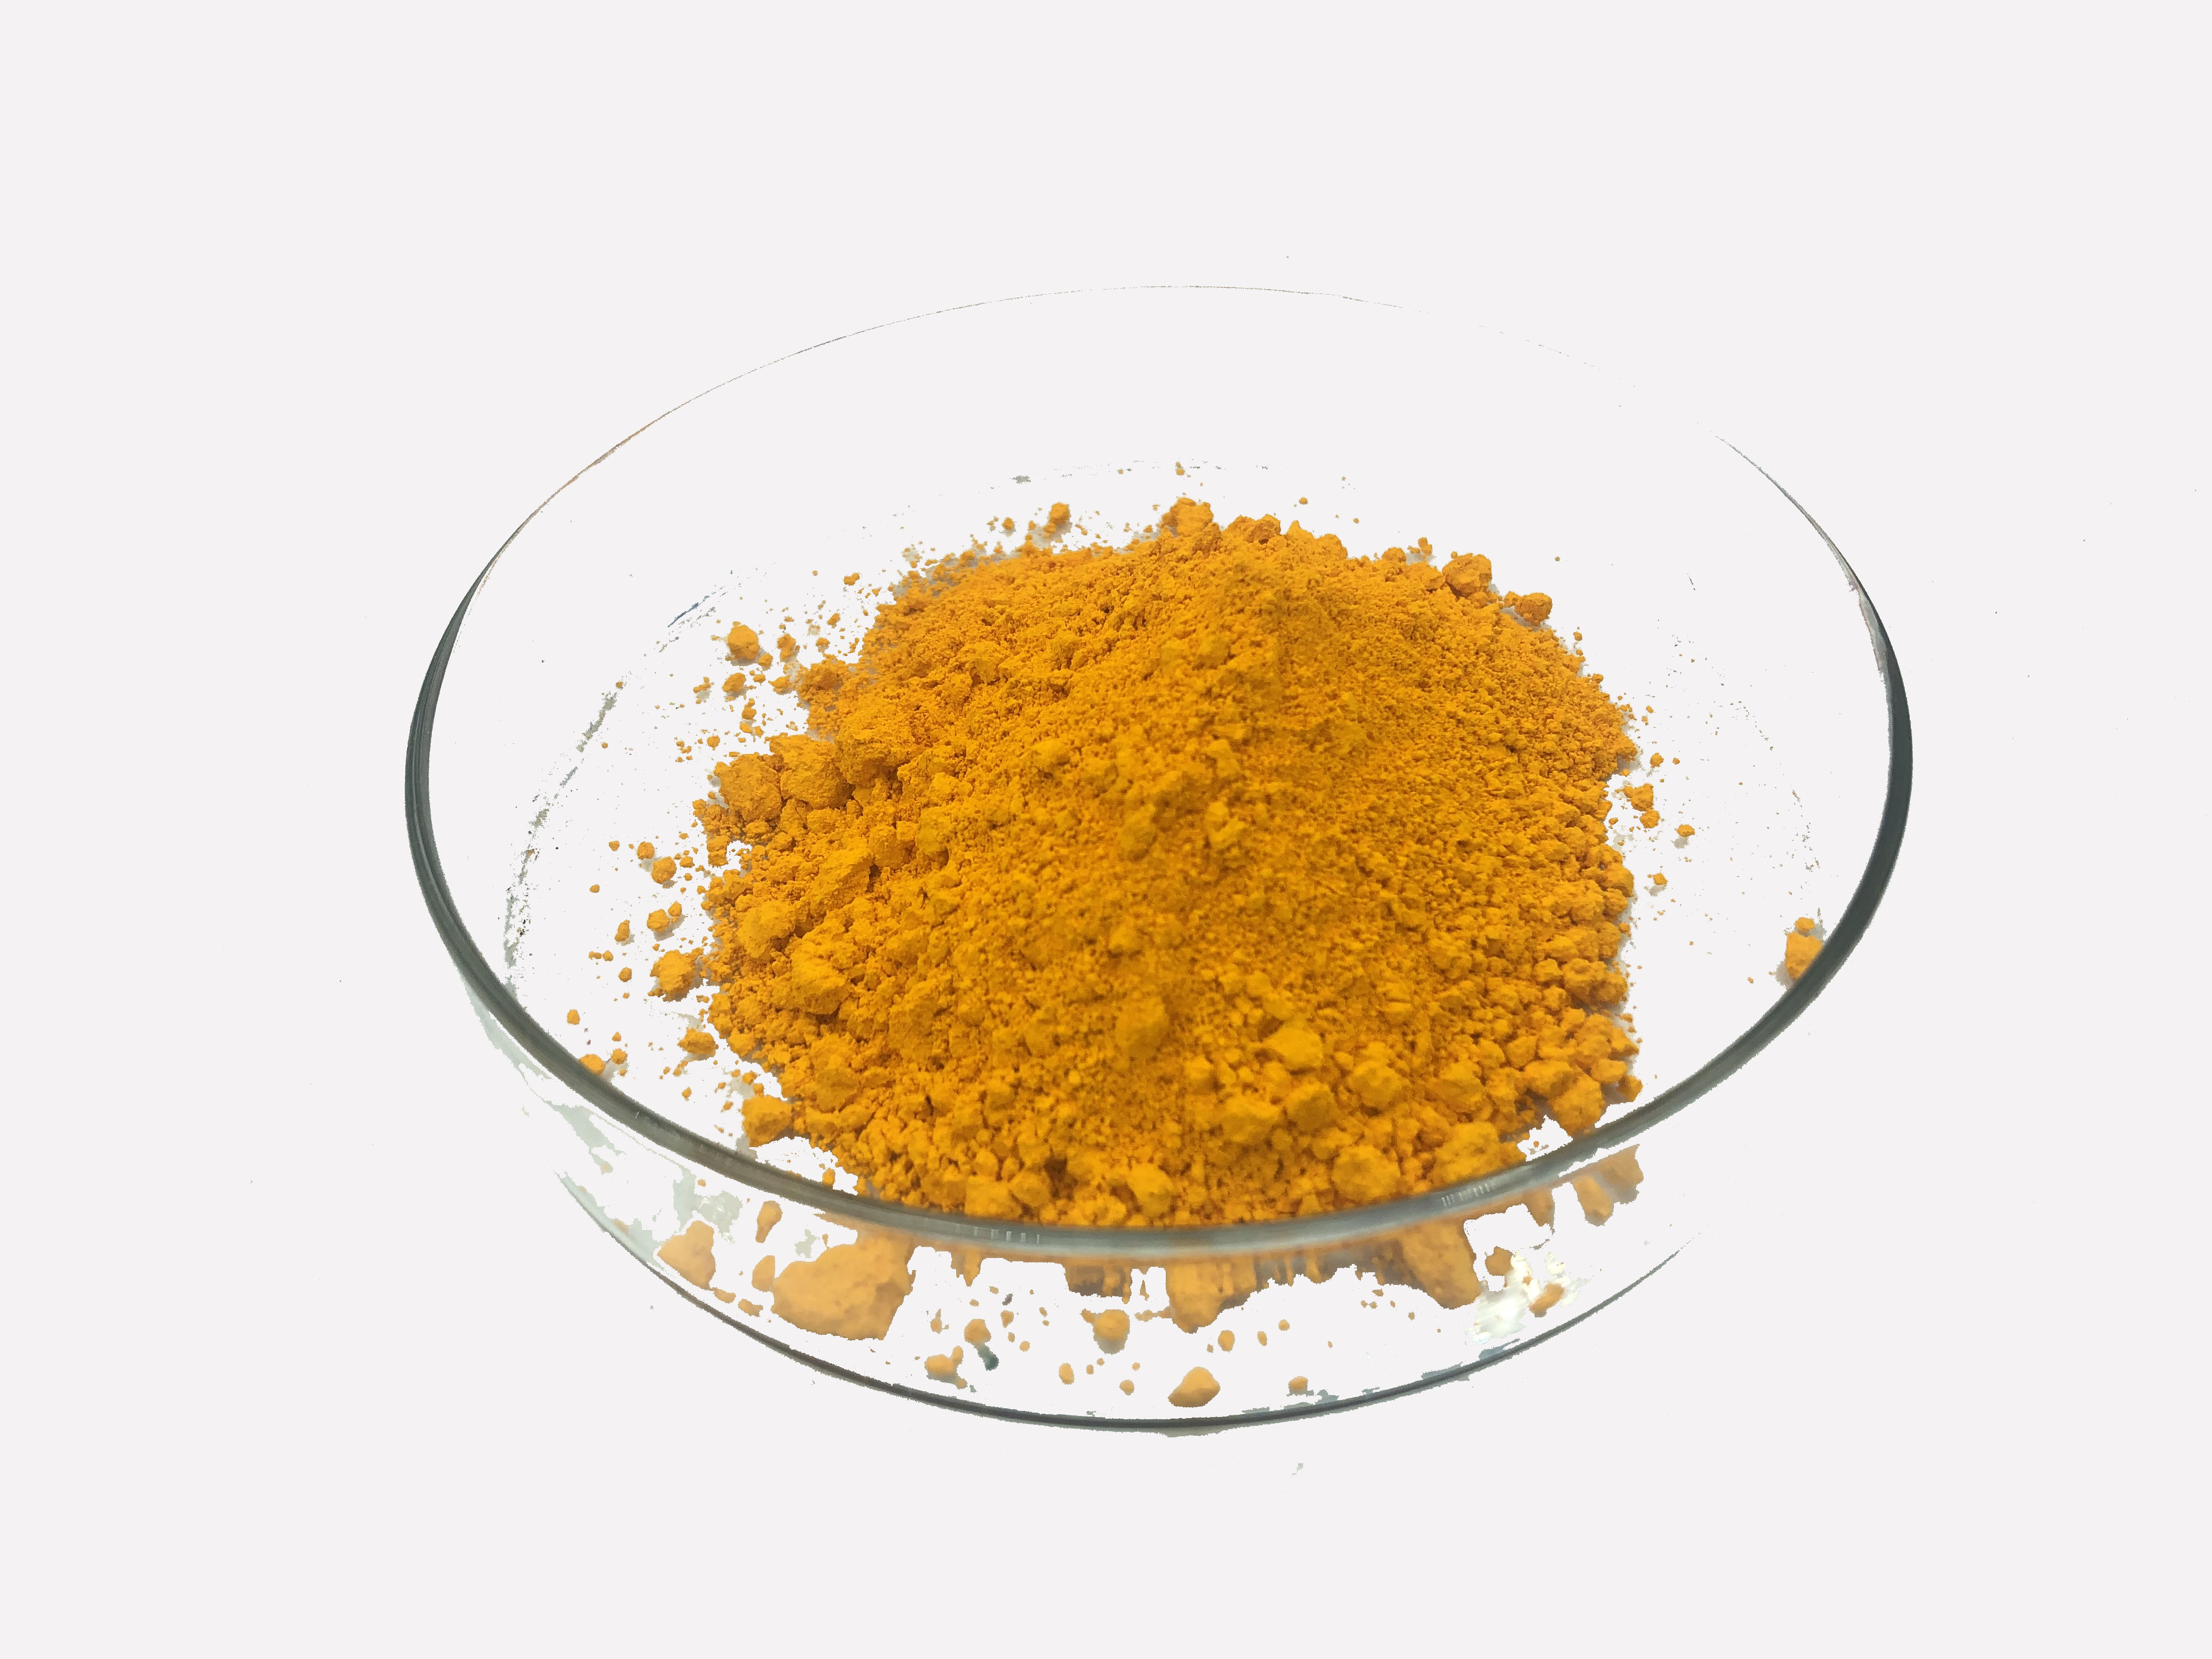 Pigment Orange 73 Eco-friendly Pure Product Multiple Use Paint And Coating Industries